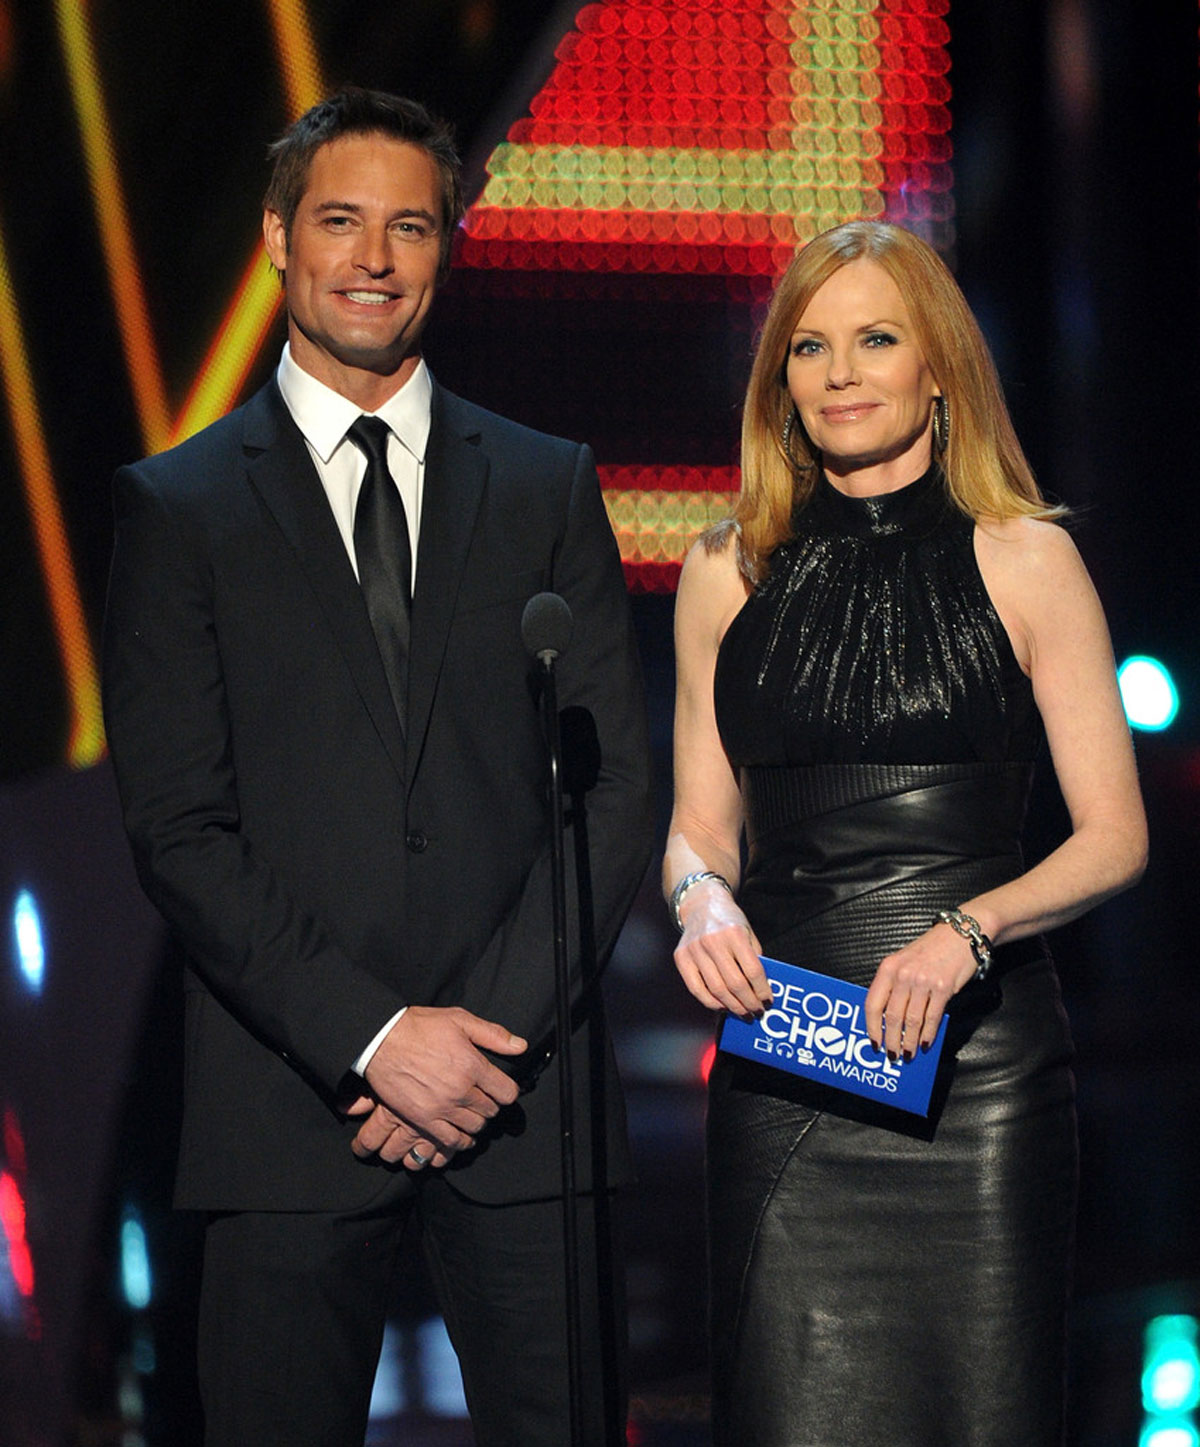 Marg Helgenberger attends The 40th Annual People’s Choice Awards